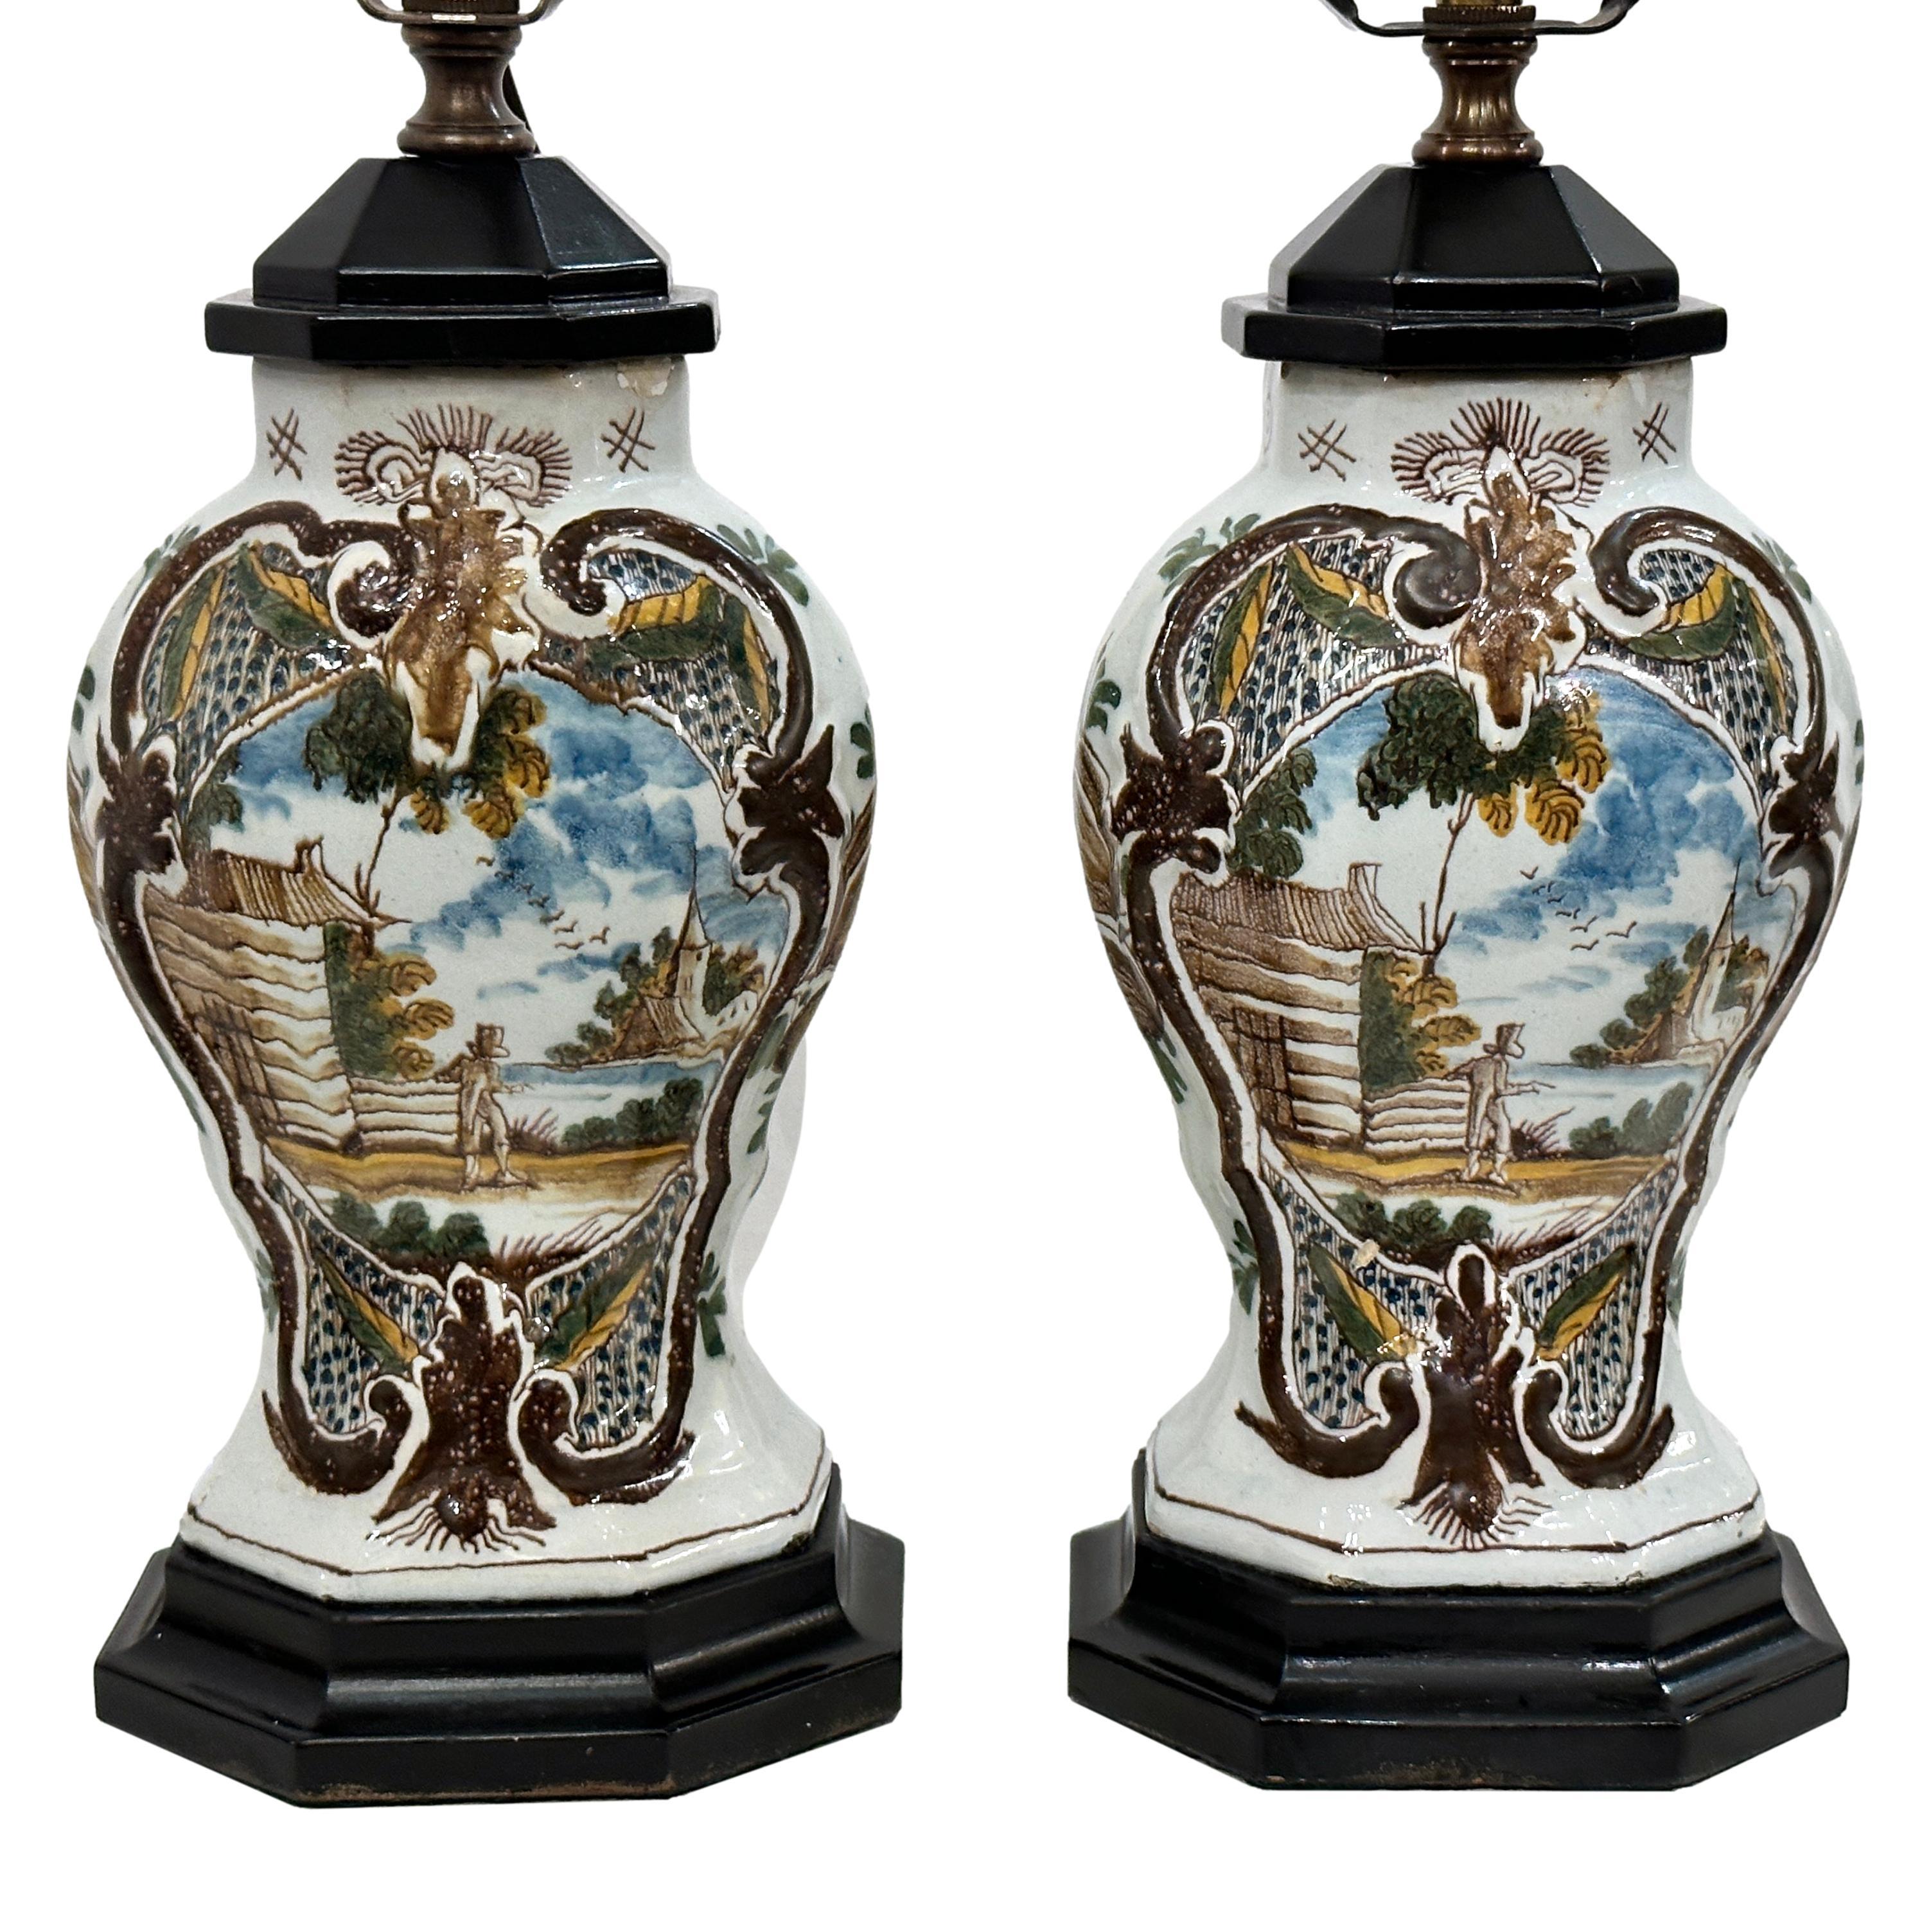 Pair of circa 1920's antique porcelain table lamps.

Measurements:
Height of body: 11